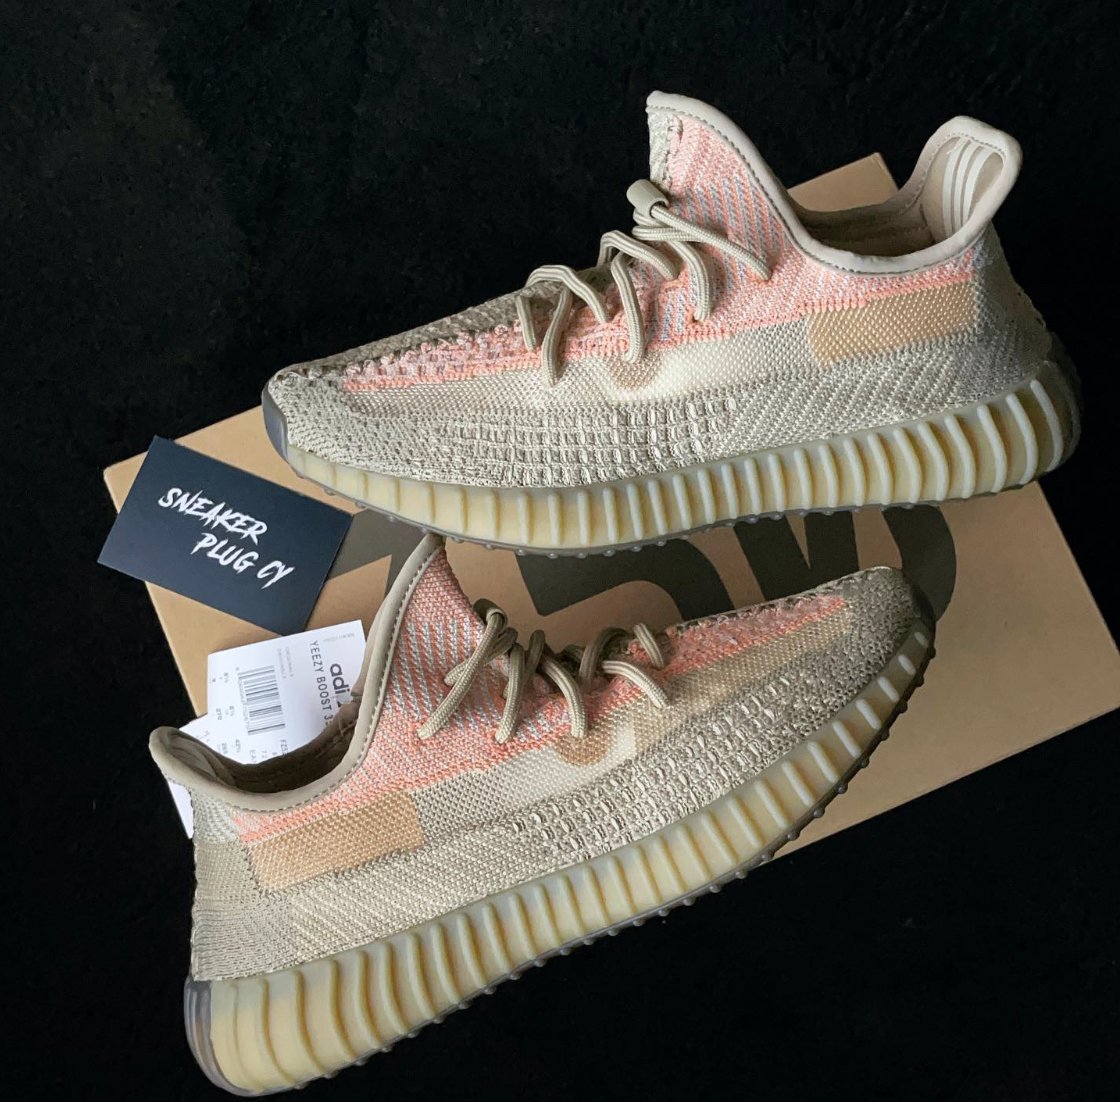 Cheap Adidas Yeezy Boost 350 V2 Desert Sage Size 6 Used With Box